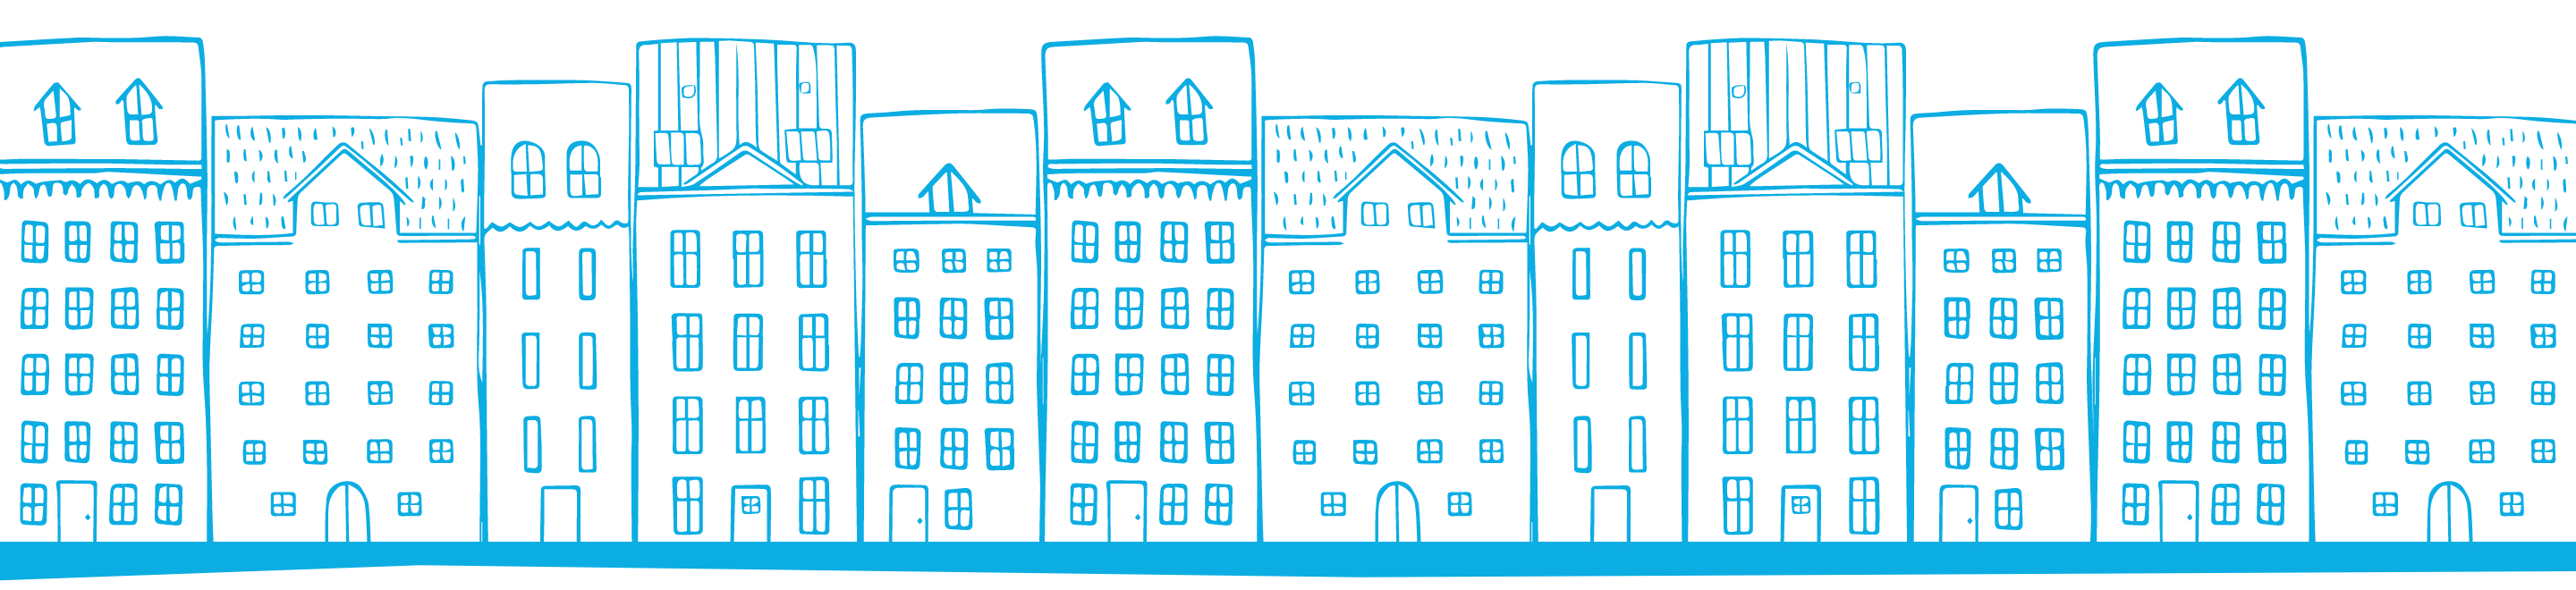 decorative background of hand-drawn row houses